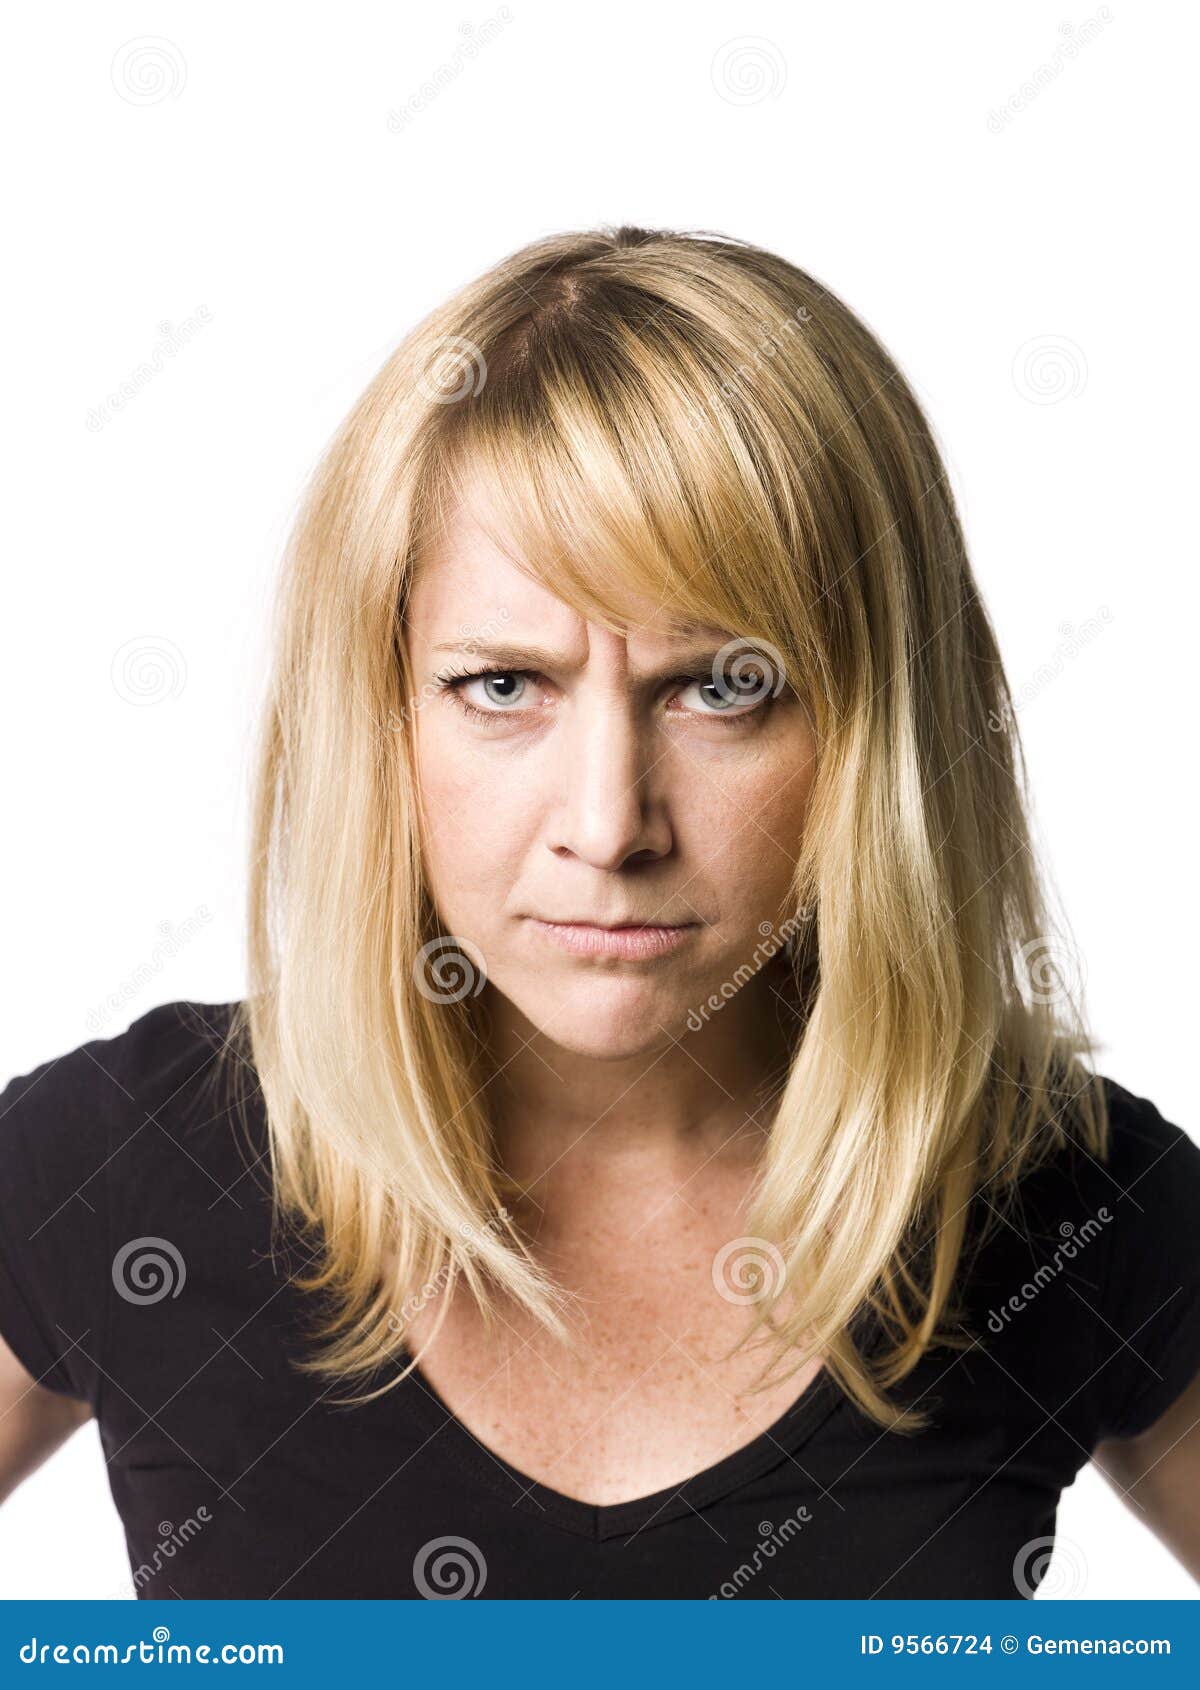 Angry woman stock photo. Image of angry, white, expression - 9566724